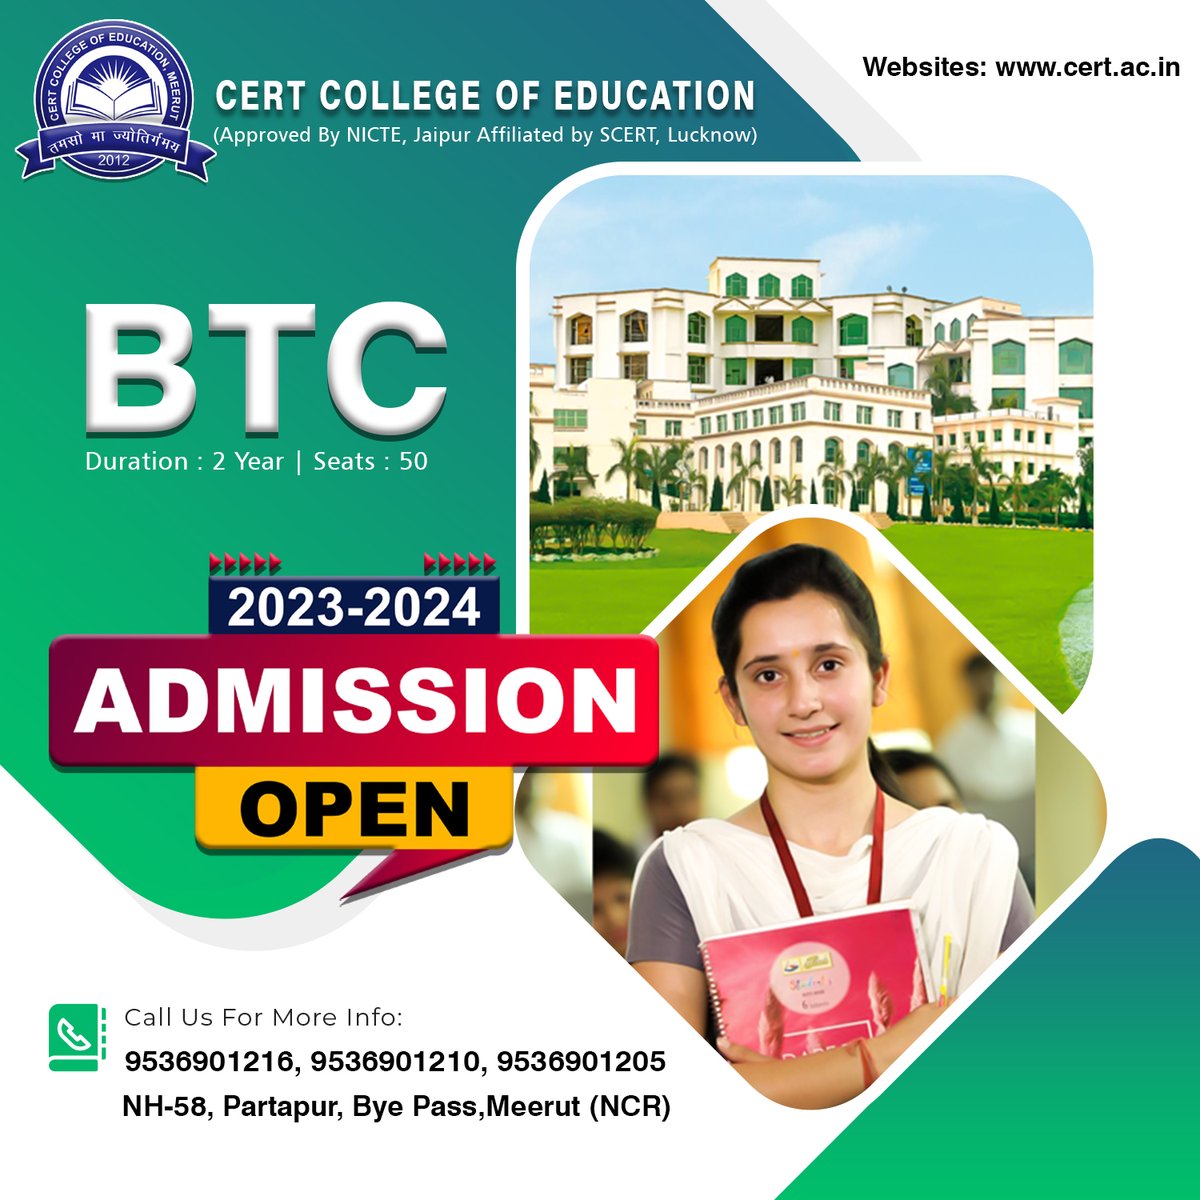 D.E.L.E.D BtC Admission starts for new session 2023-2024
.
.
Btc admission starts for new session . . Who else is joining me in this exciting journey? Are you a current or former teacher?   
#futureteacher #DELED #BTC  #teachonline #backtoschool #educationmatters #CollegeStudent